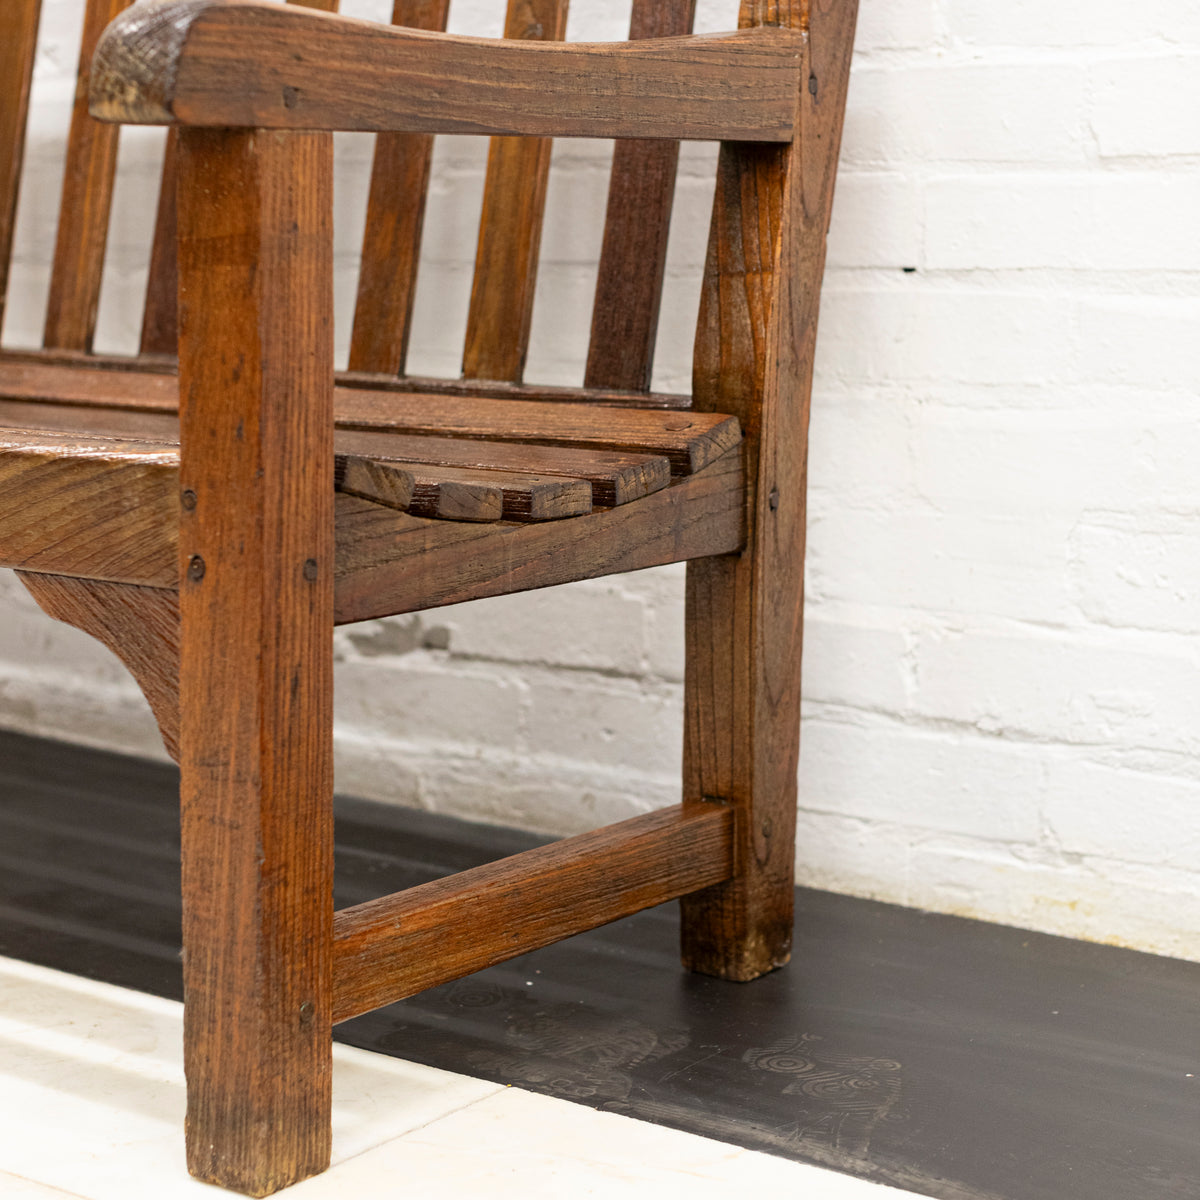 Reclaimed Teak Bench | The Architectural Forum